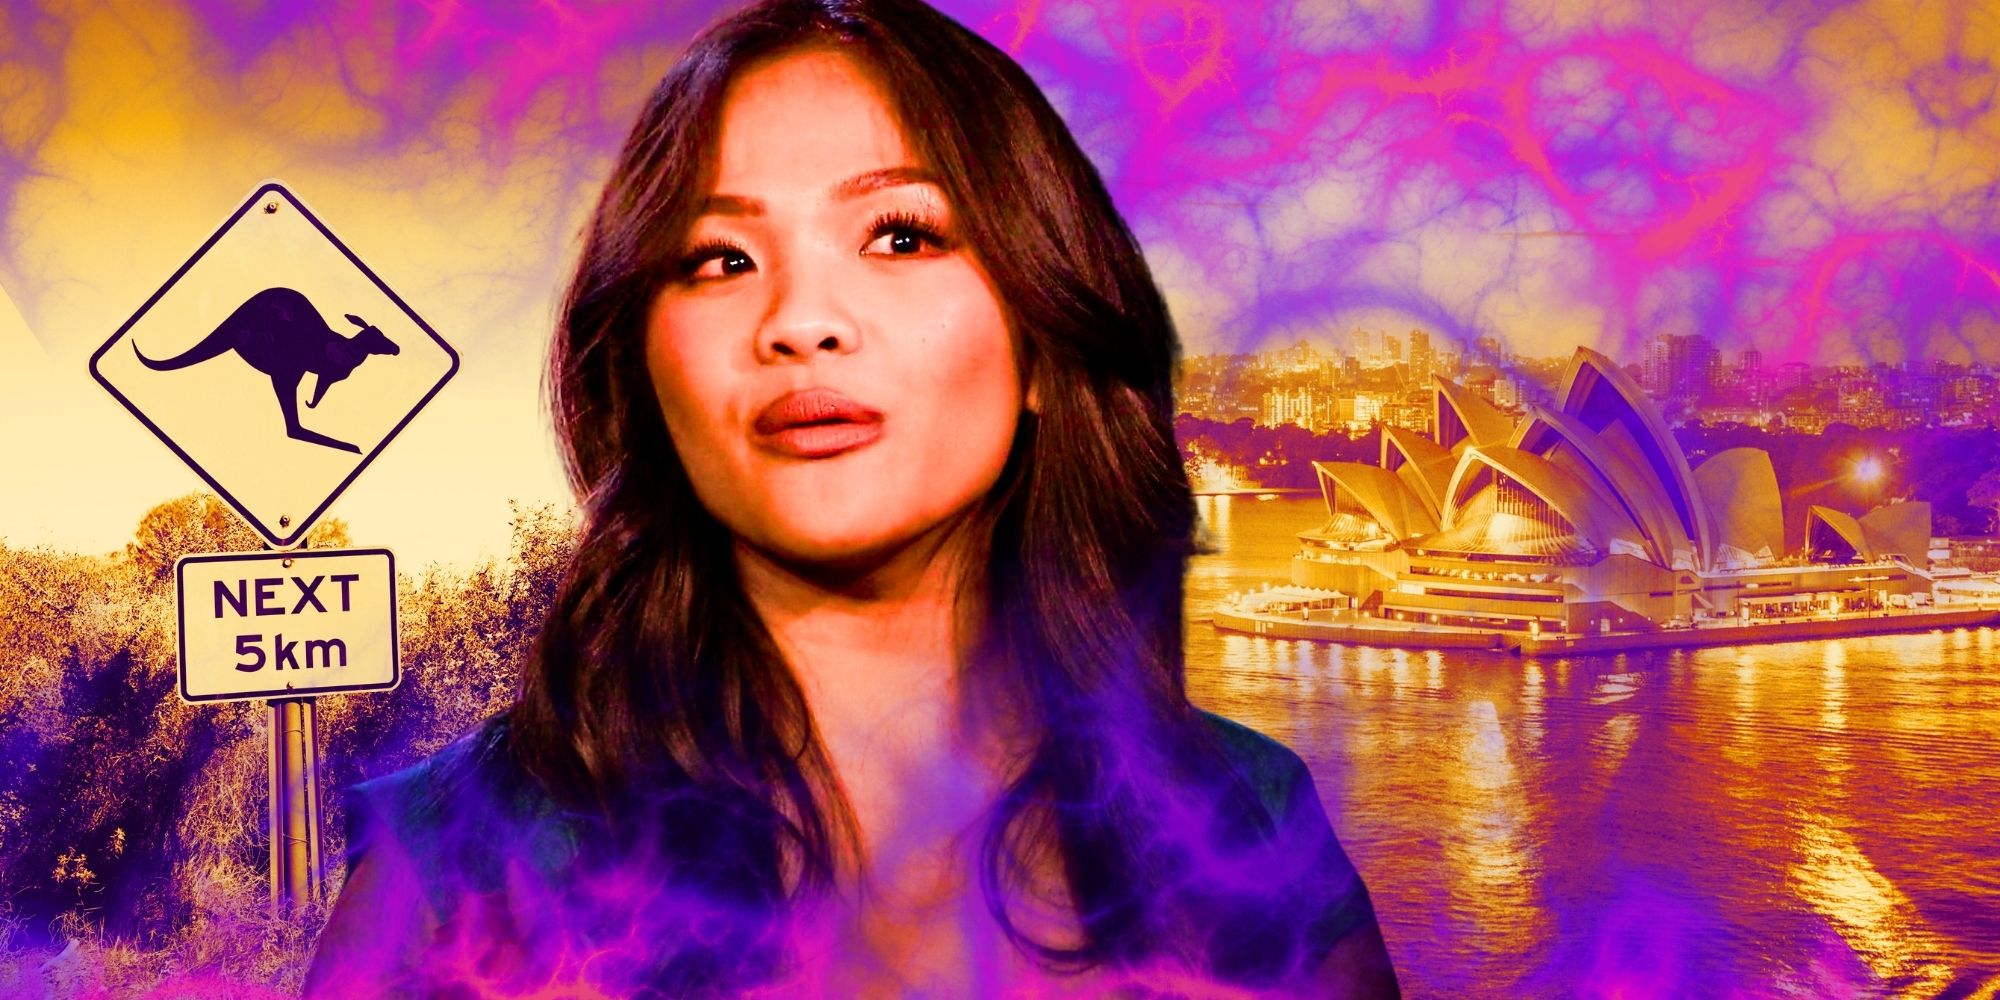 The Bachelorette's Jenn Tran looks serious, with the Sydney Opera House in the background.